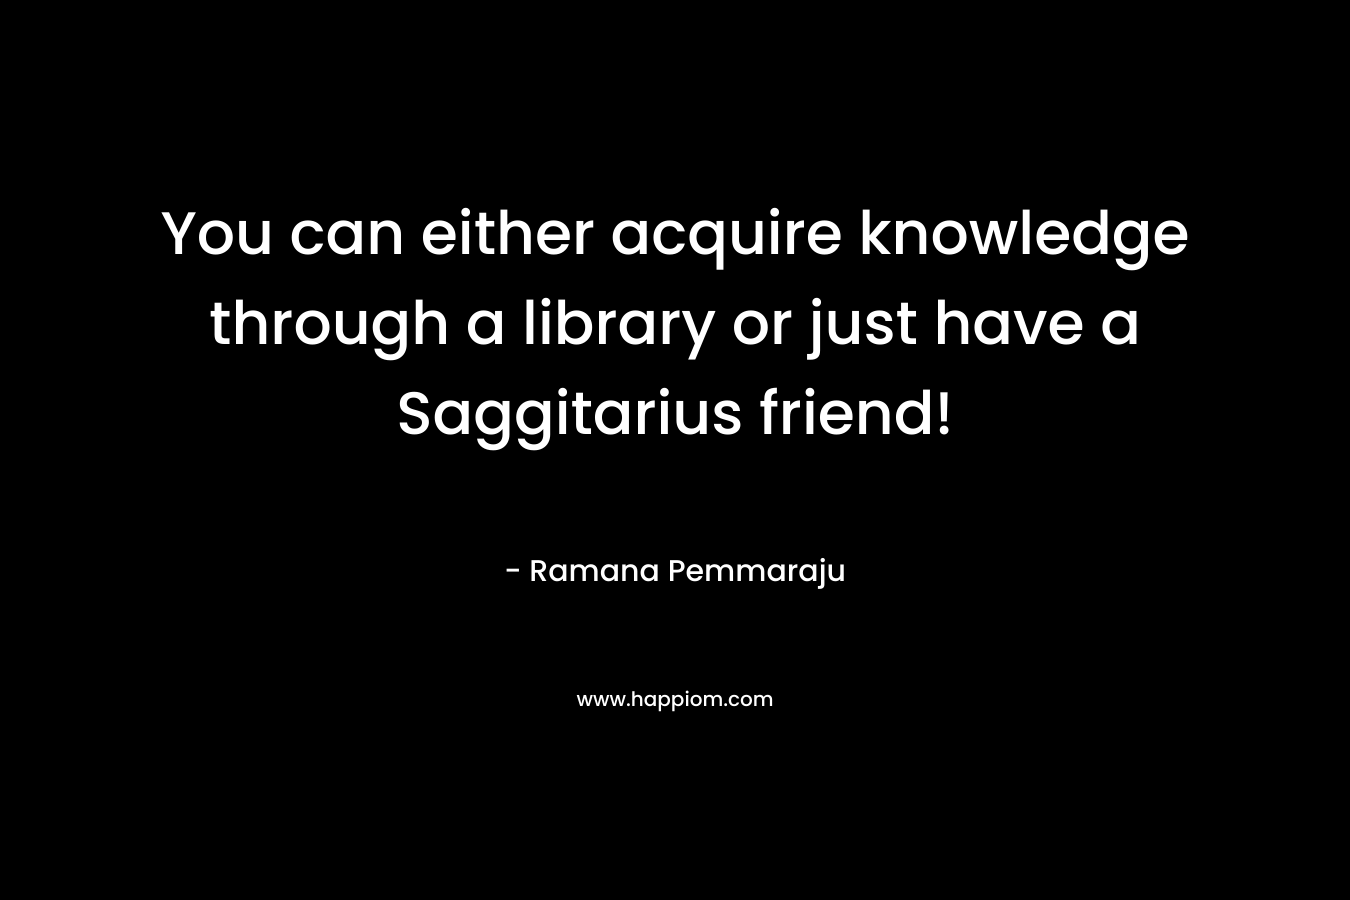 You can either acquire knowledge through a library or just have a Saggitarius friend!